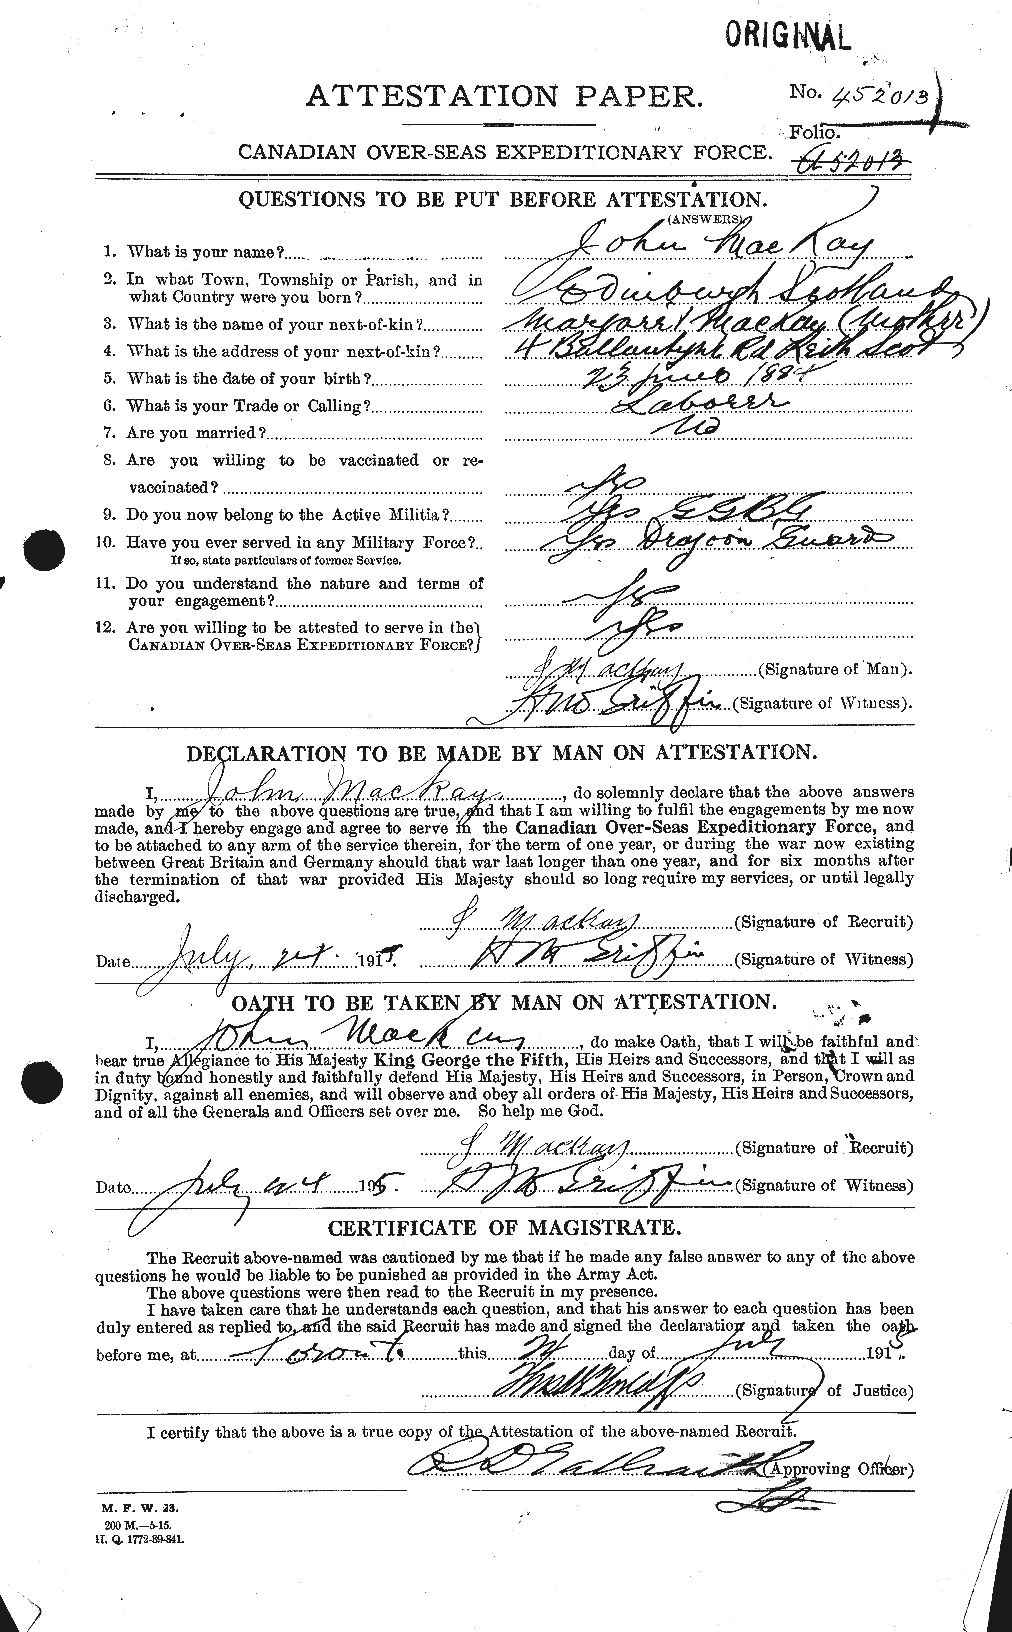 Personnel Records of the First World War - CEF 526960a